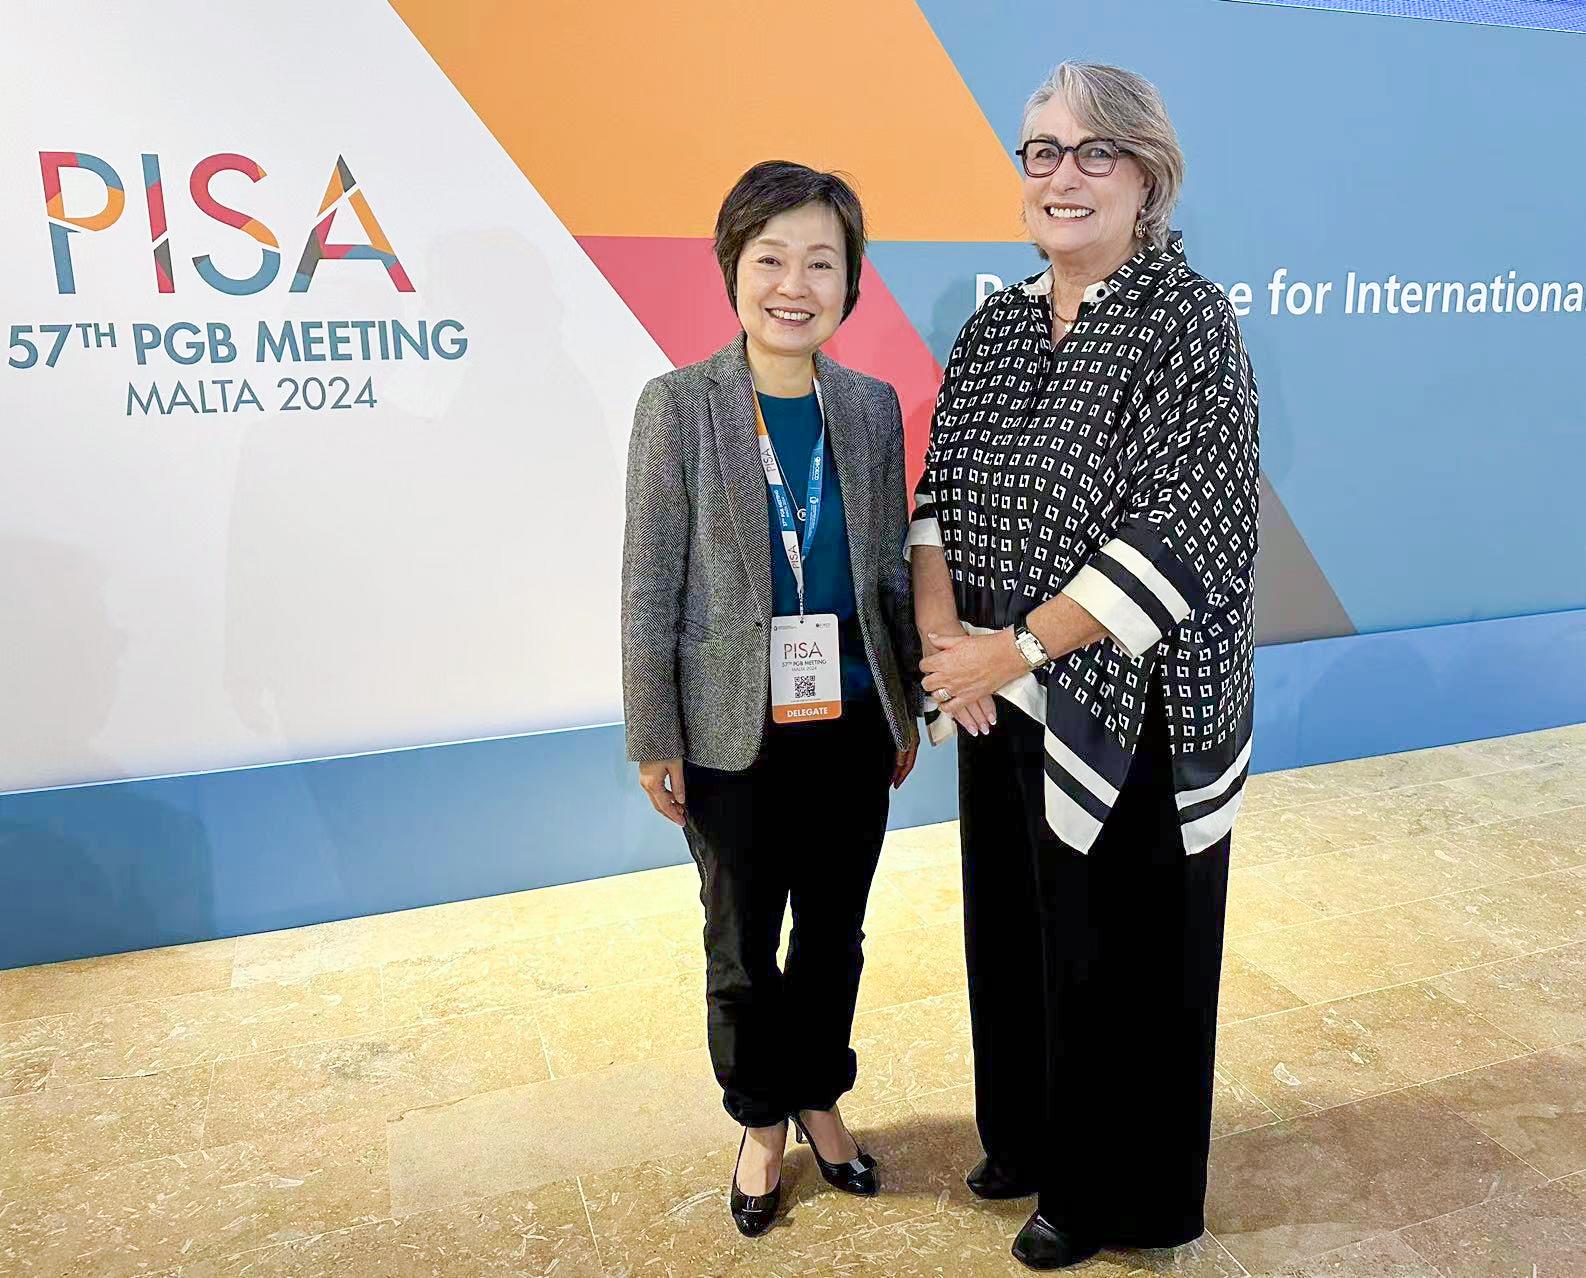 The Secretary for Education, Dr Choi Yuk-lin, attended the Programme for International Student Assessment (PISA) Governing Board Meeting organised by the Organisation for Economic Co-operation and Development in Malta from April 17 to 19 (Malta time). Photo shows Dr Choi (left) and the Chair of the PISA Governing Board, Dr Michele Bruniges (right).